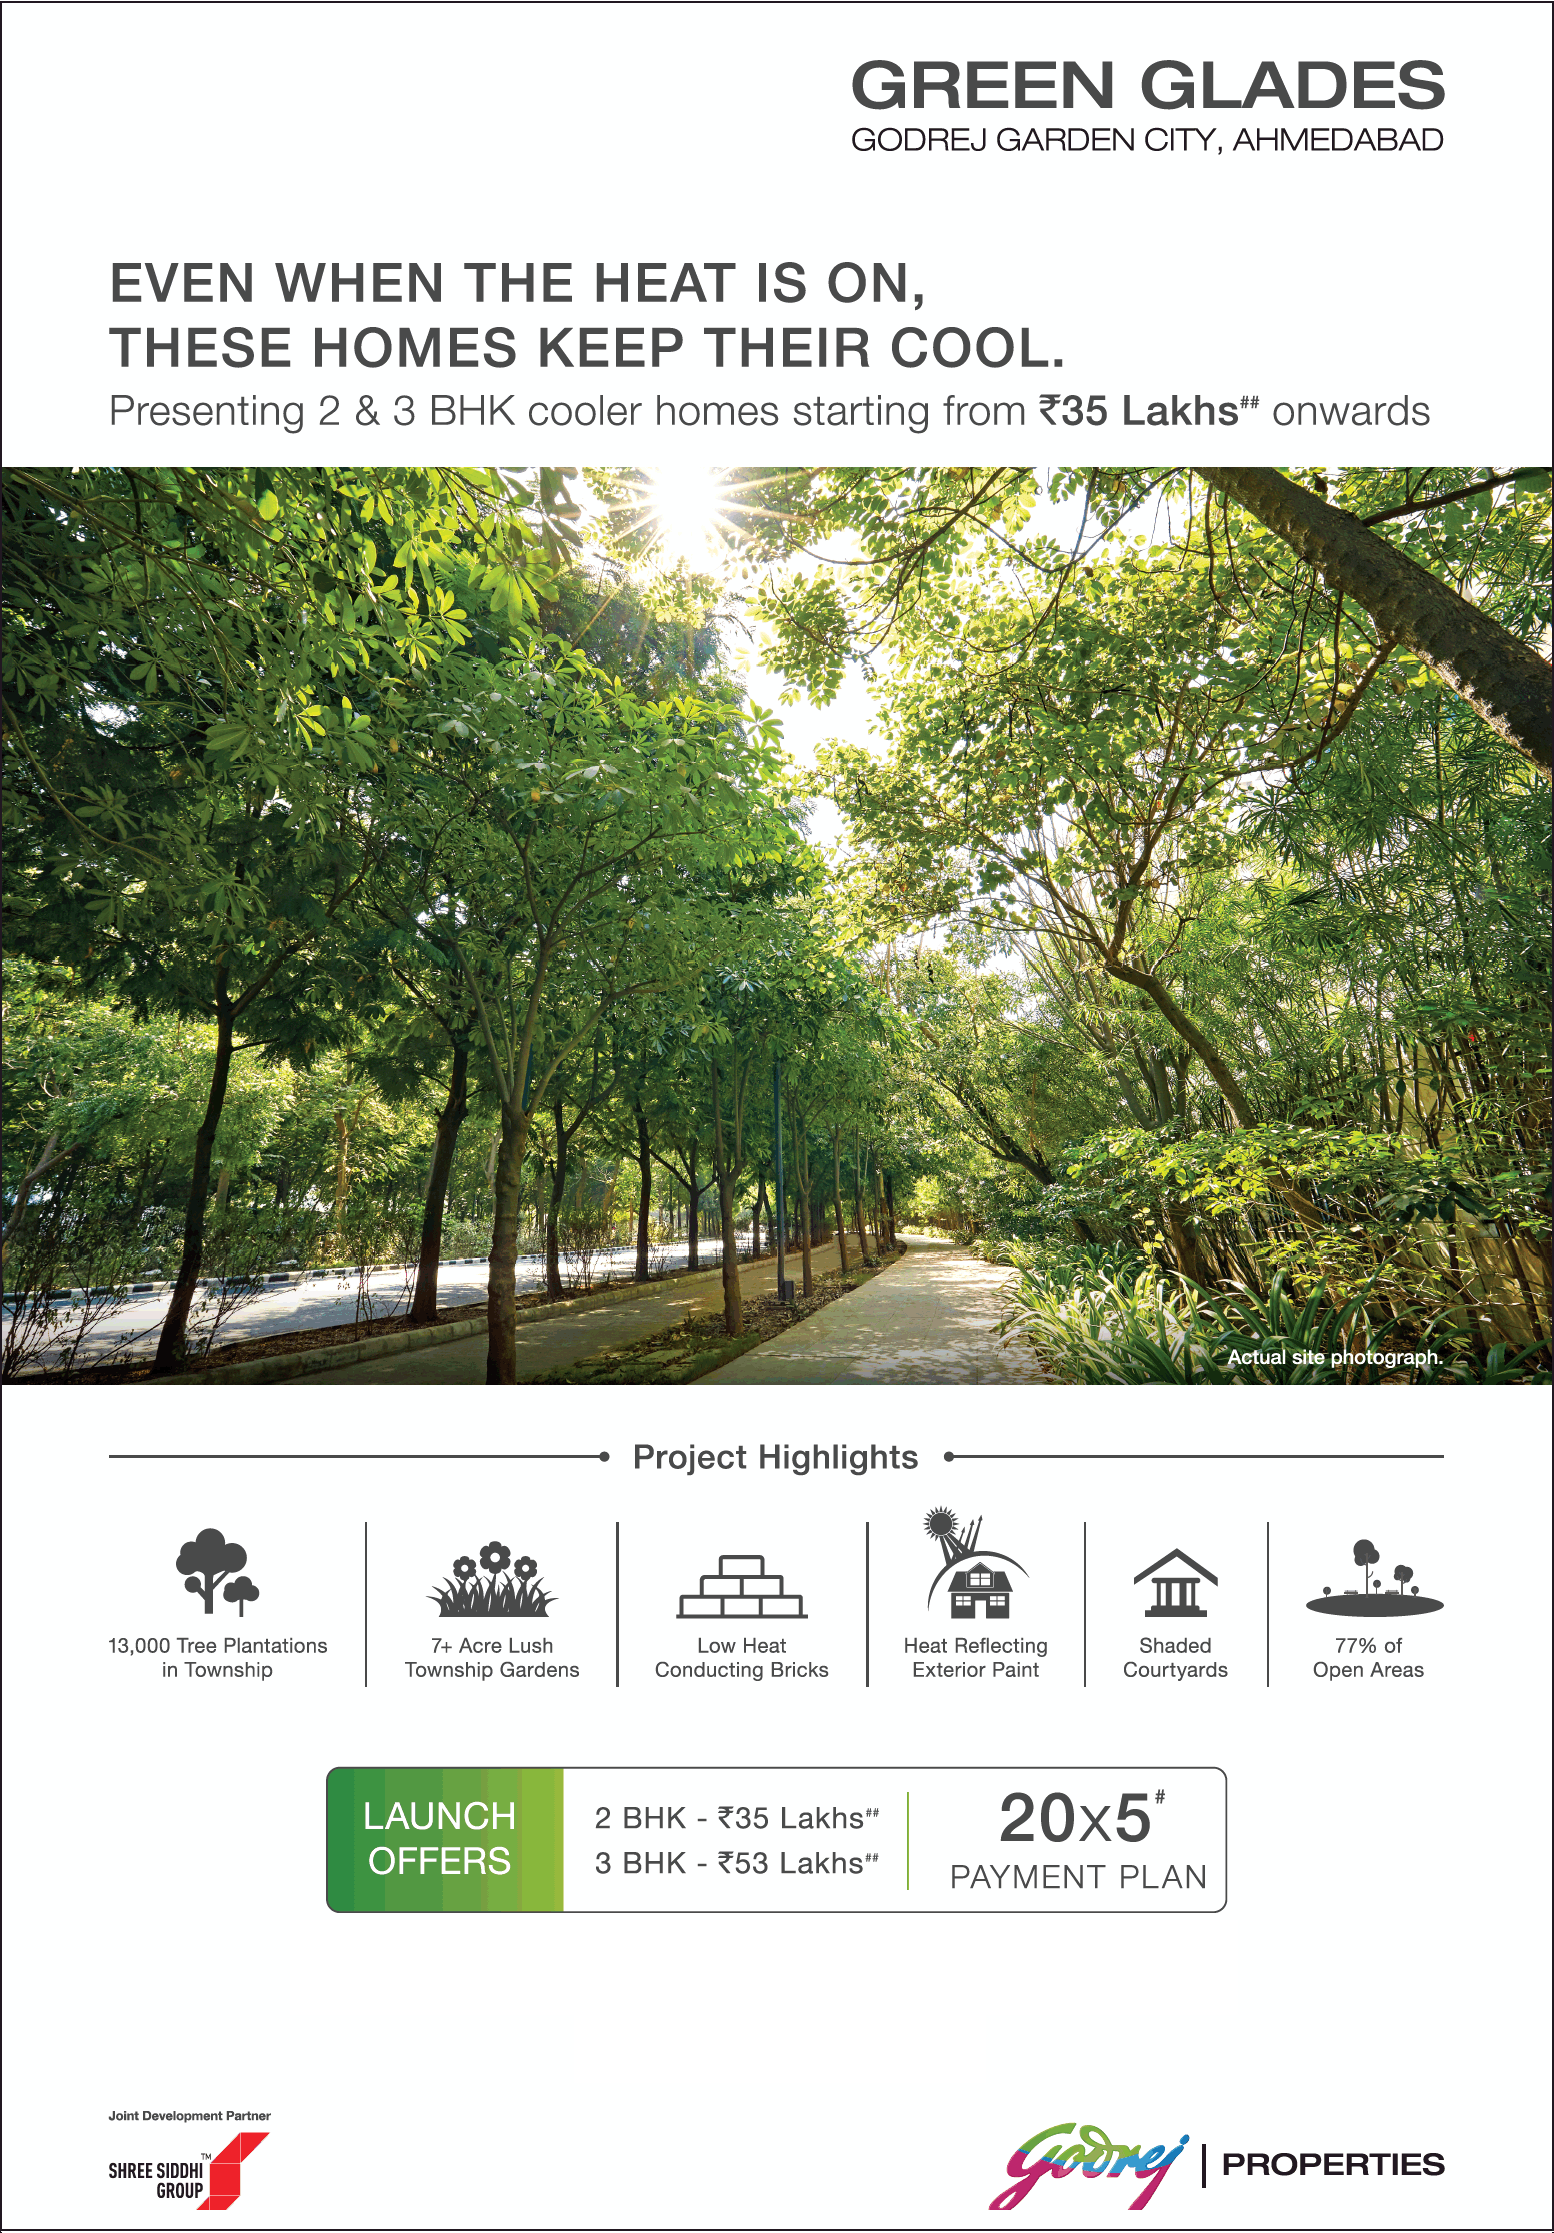 Godrej presenting 2 & 3 bhk cooler homes at Rs. 35 lakhs at Green Glades in Ahmedabad Update